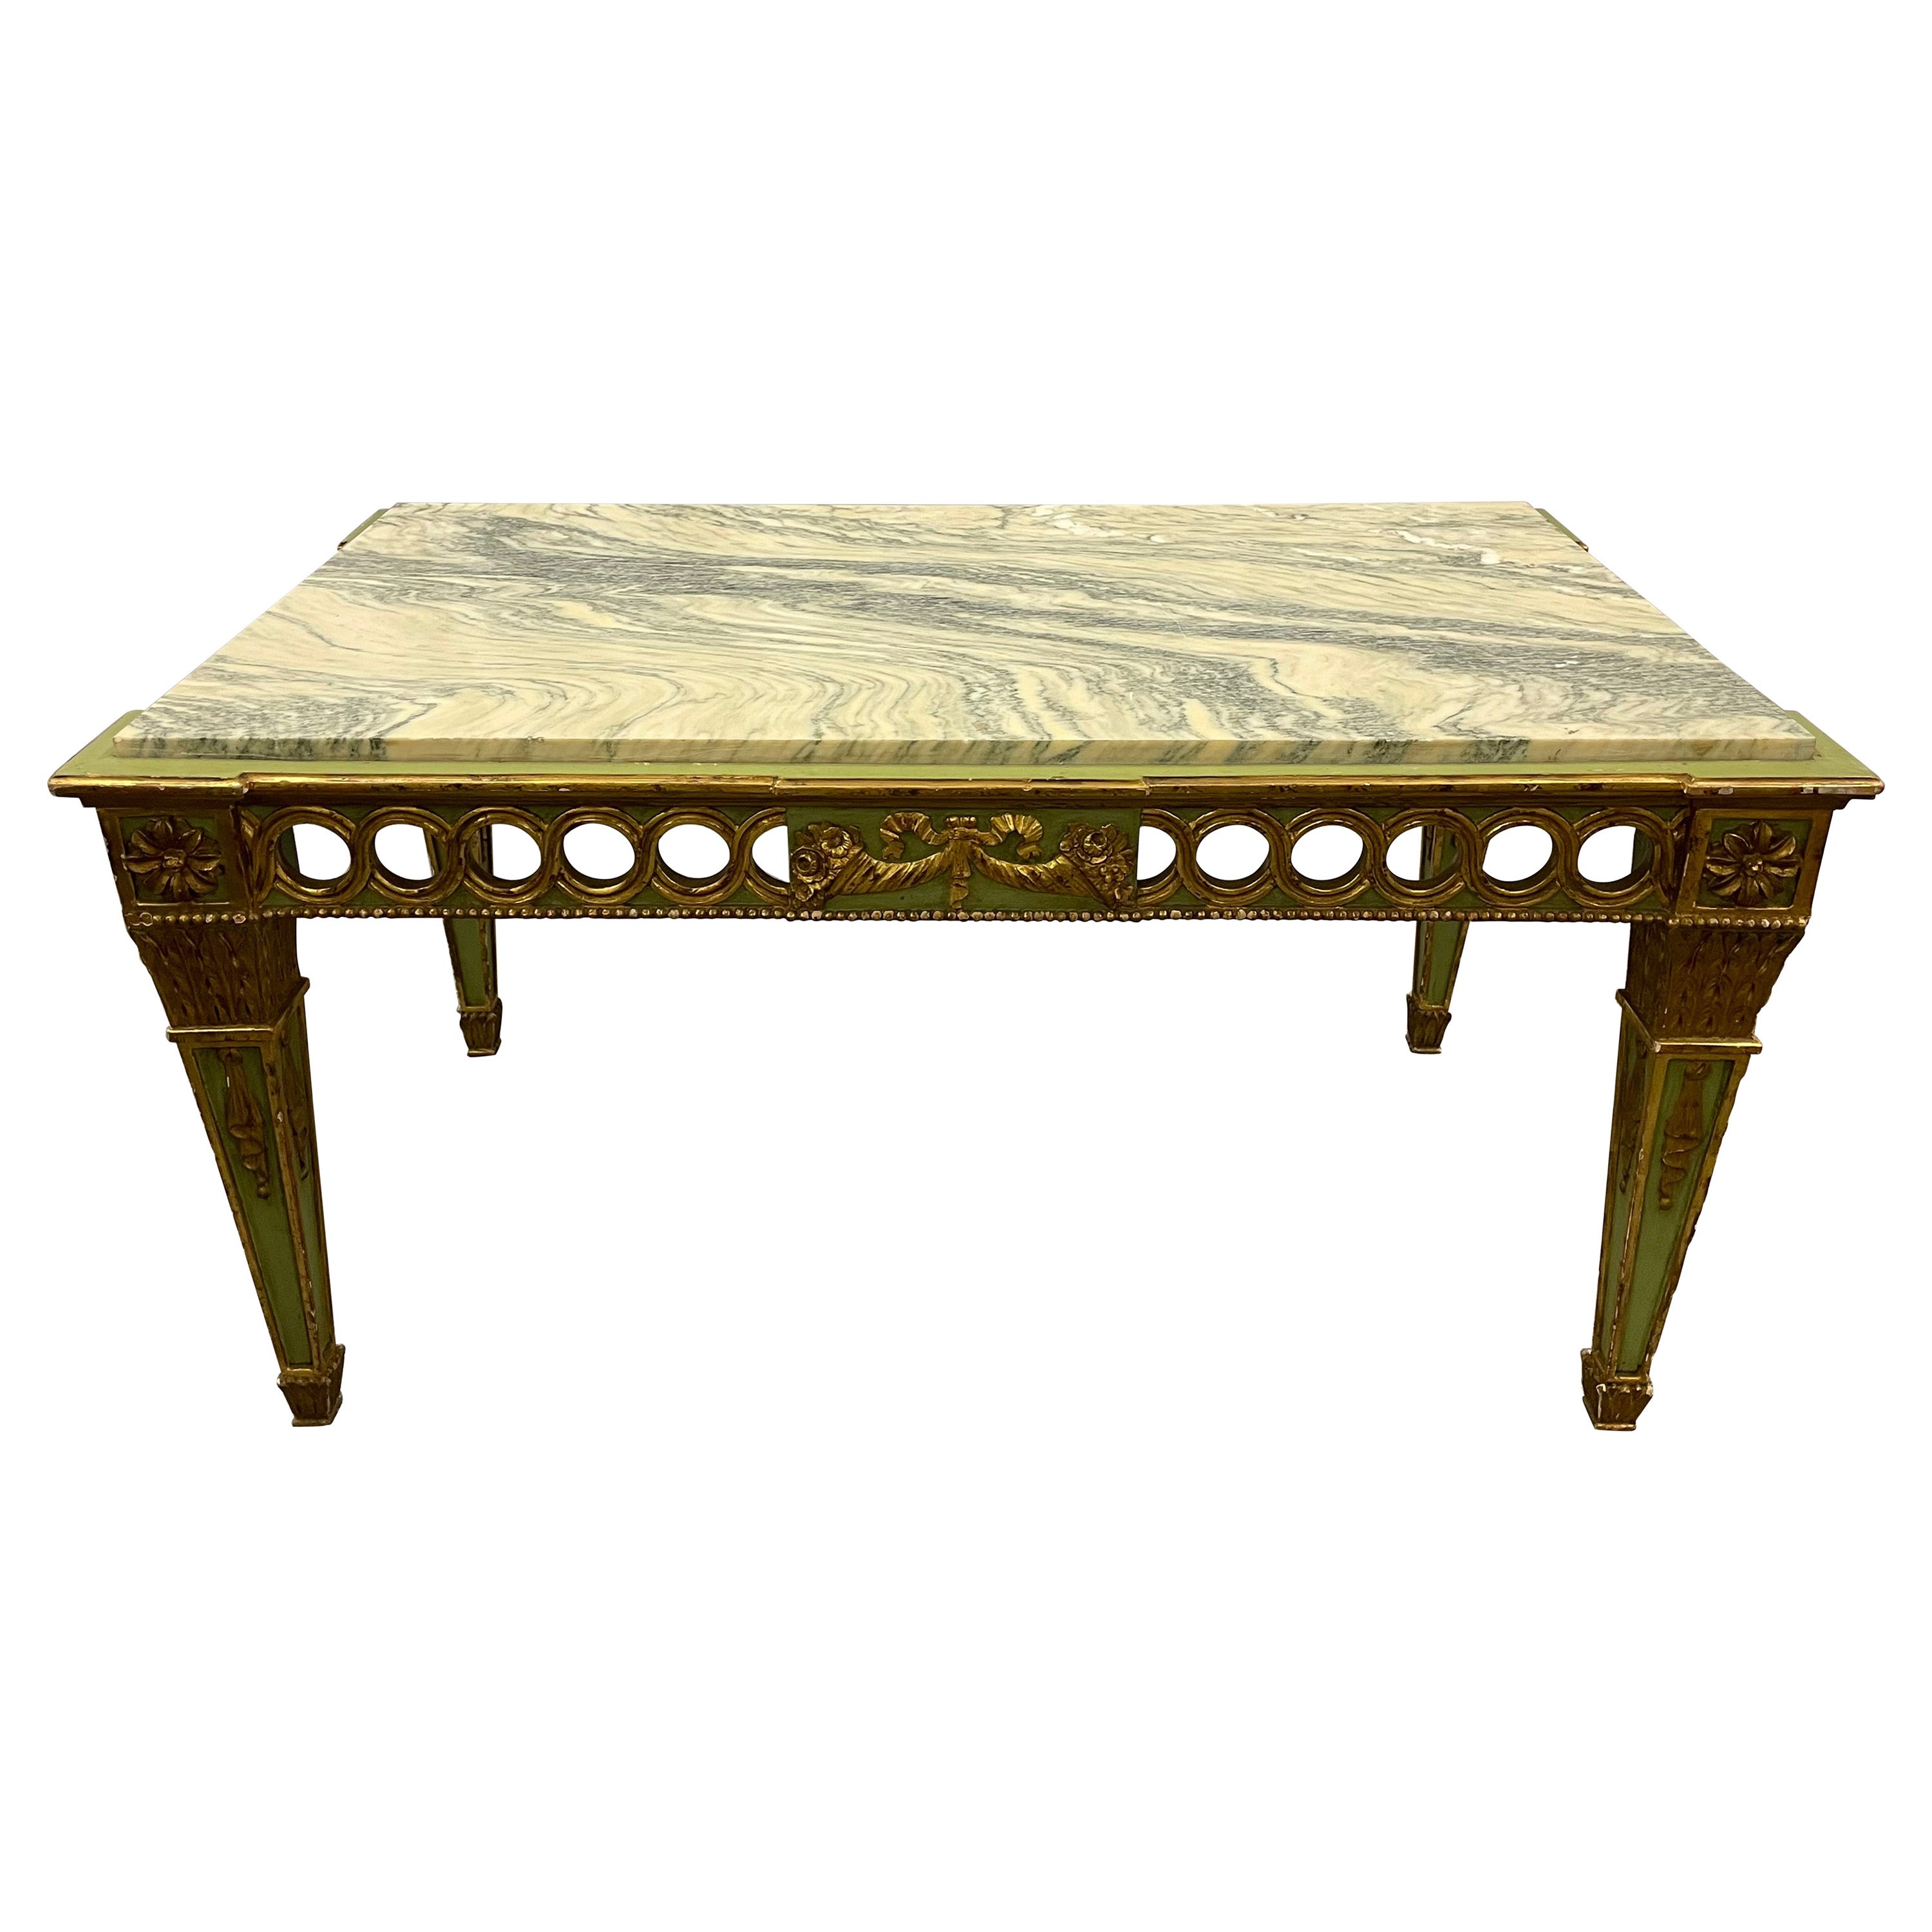 Hollywood Regency Coffee Table by Maison Jansen, Marble Top, Painted